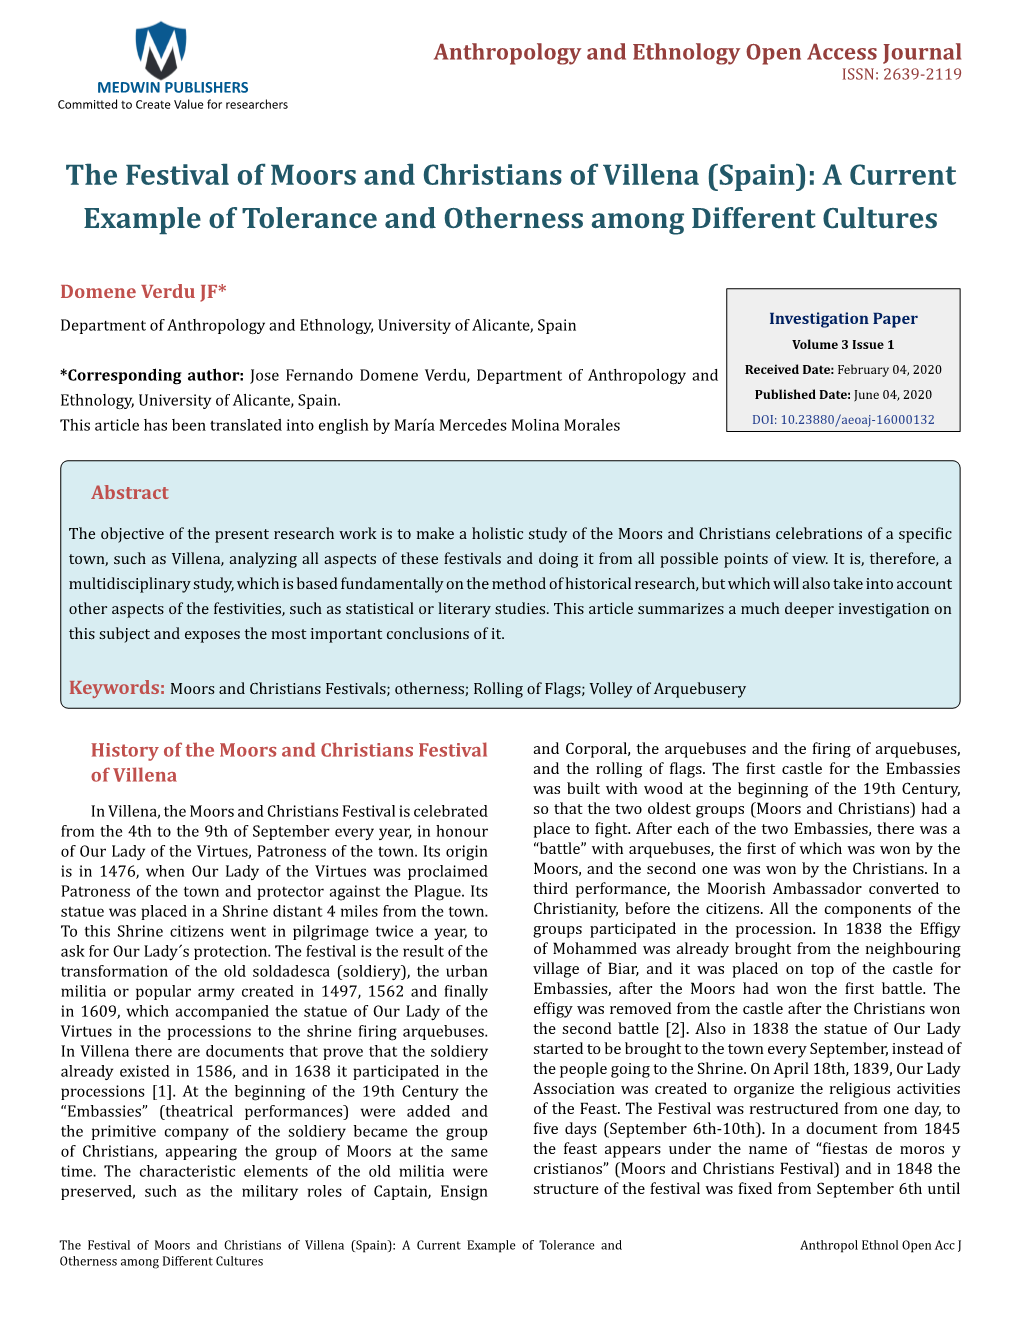 The Festival of Moors and Christians of Villena (Spain): a Current Example of Tolerance and Otherness Among Different Cultures